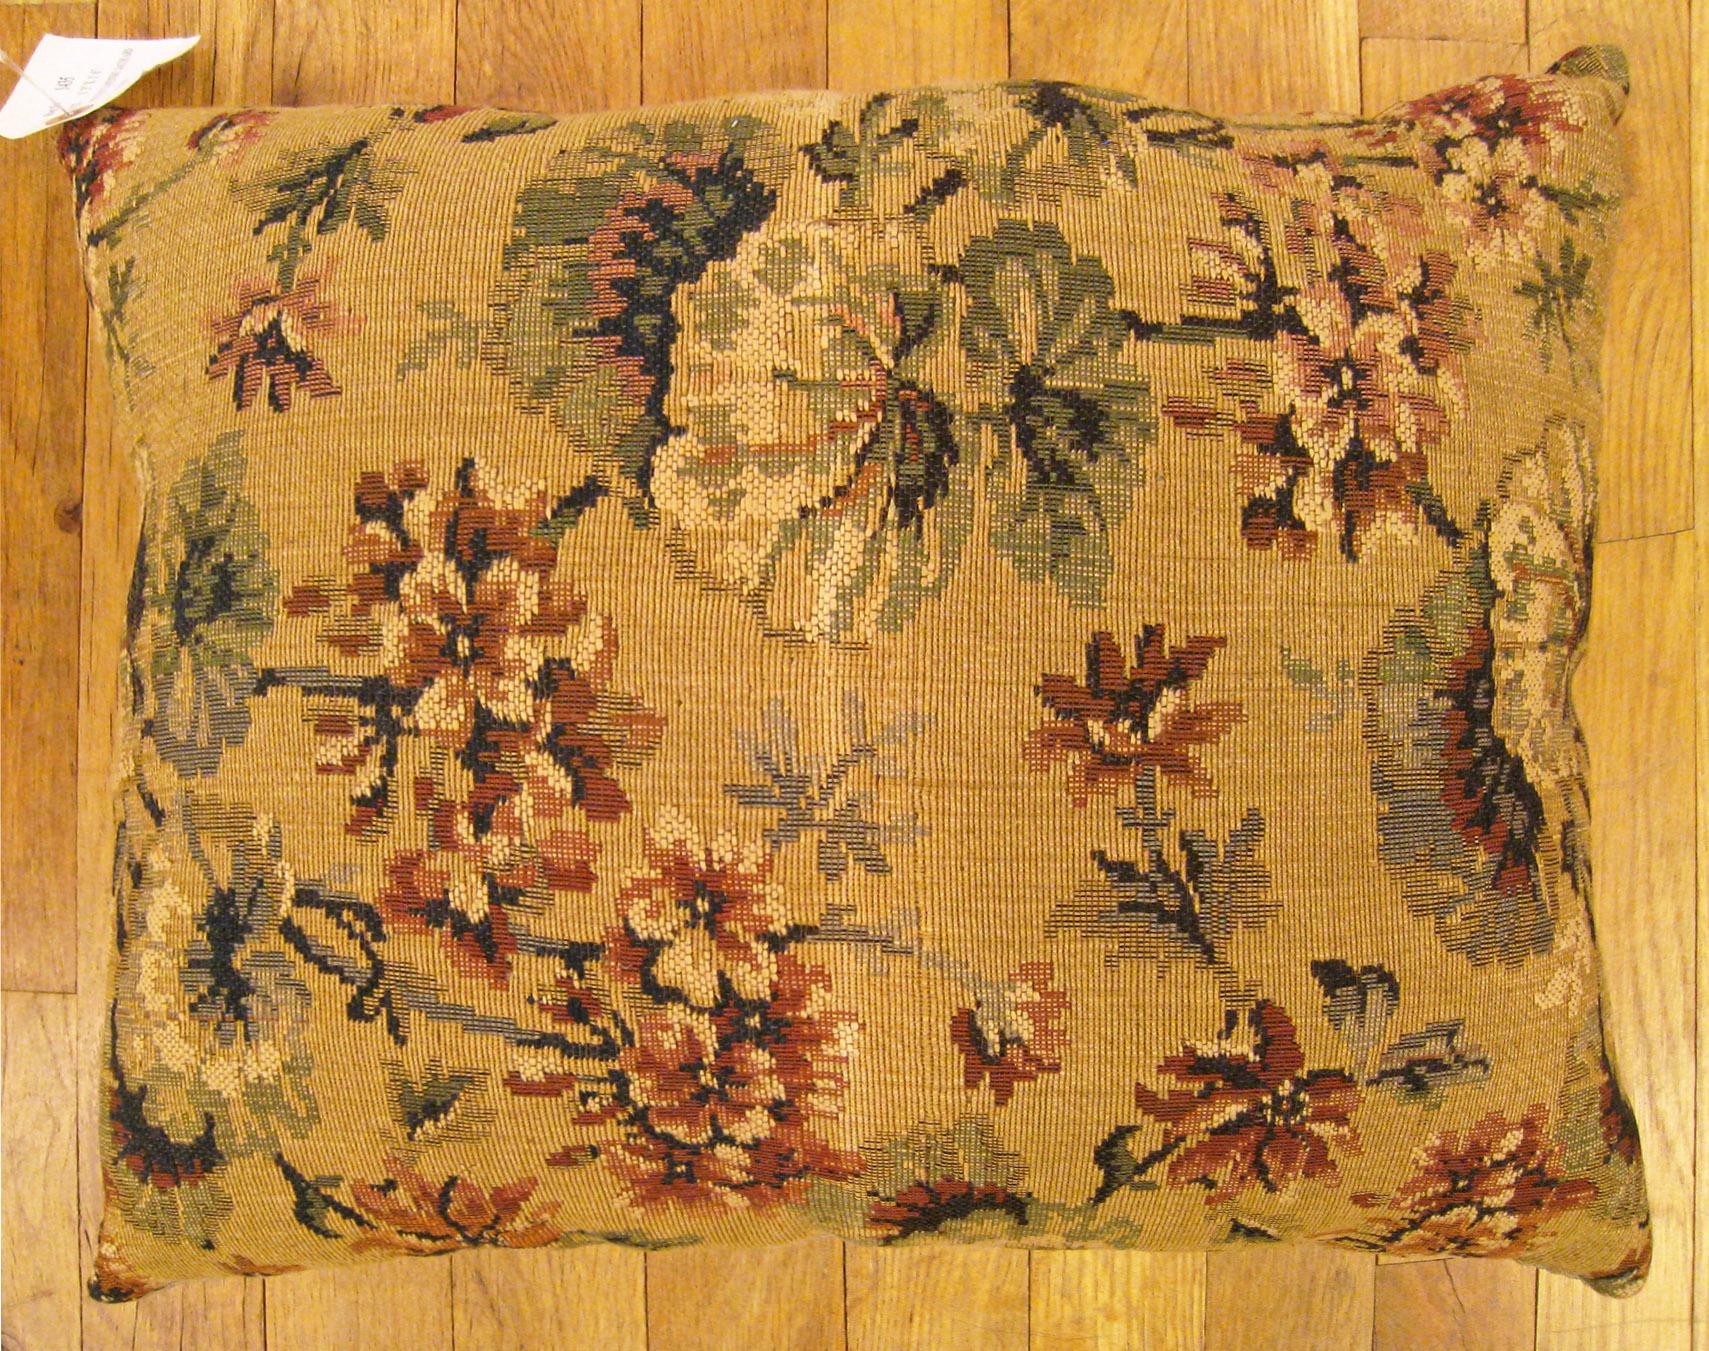 Antique Jacquard Tapestry pillow; size 1'3” x 1'6”.

An antique decorative pillow with floral elments allover a light gold central field, size 1'3